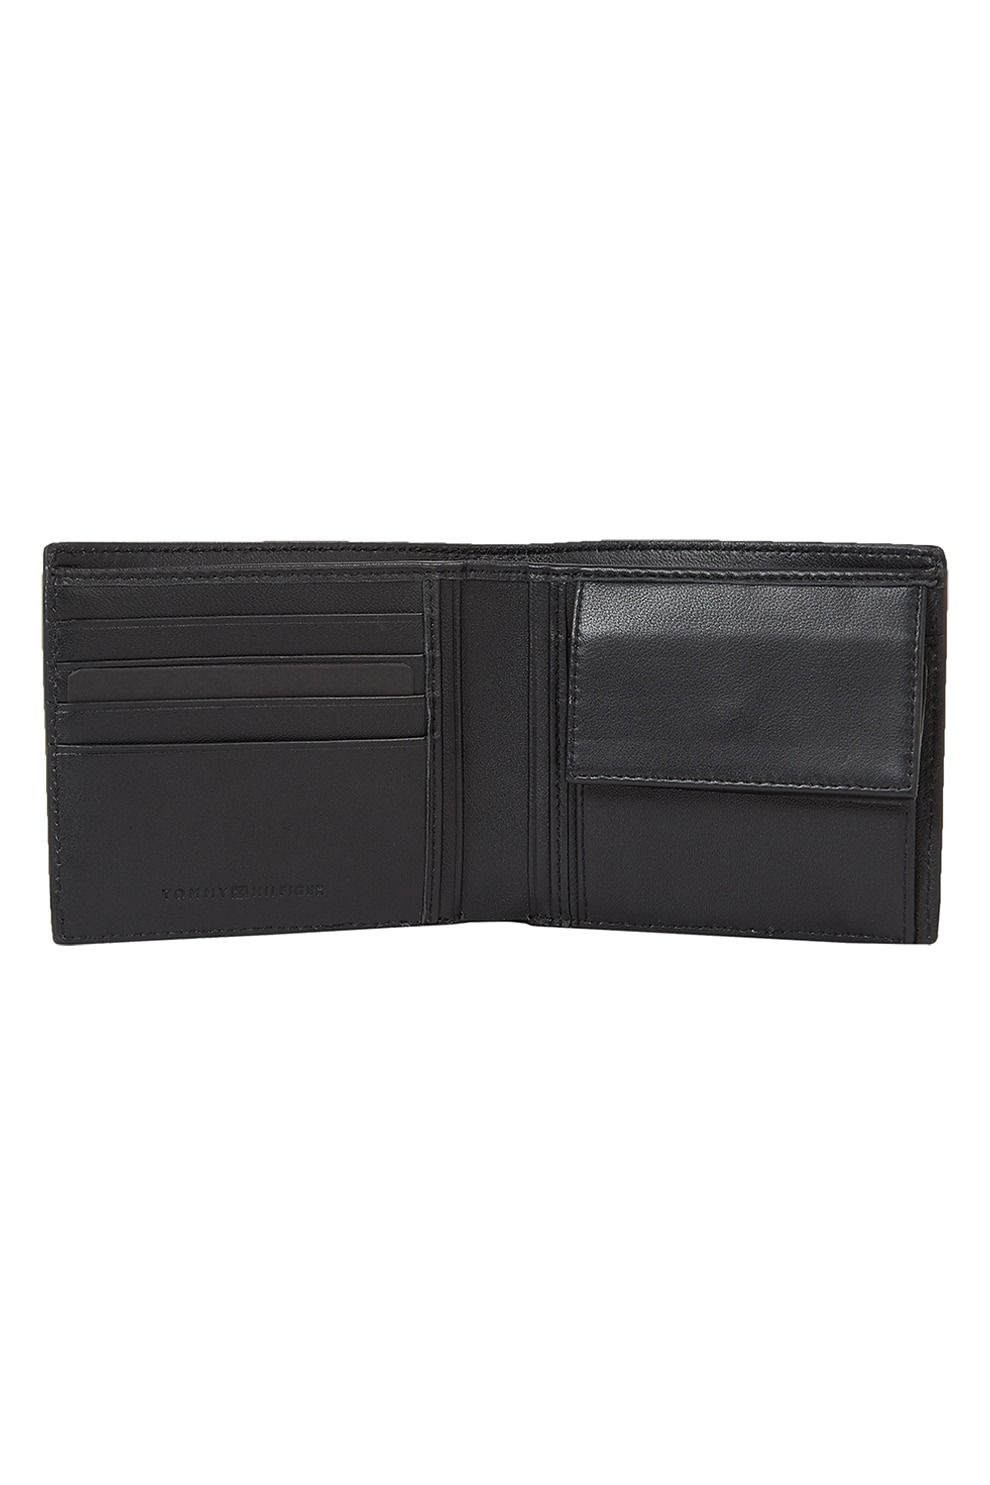 Tommy Hilfiger Small Leather Wallet